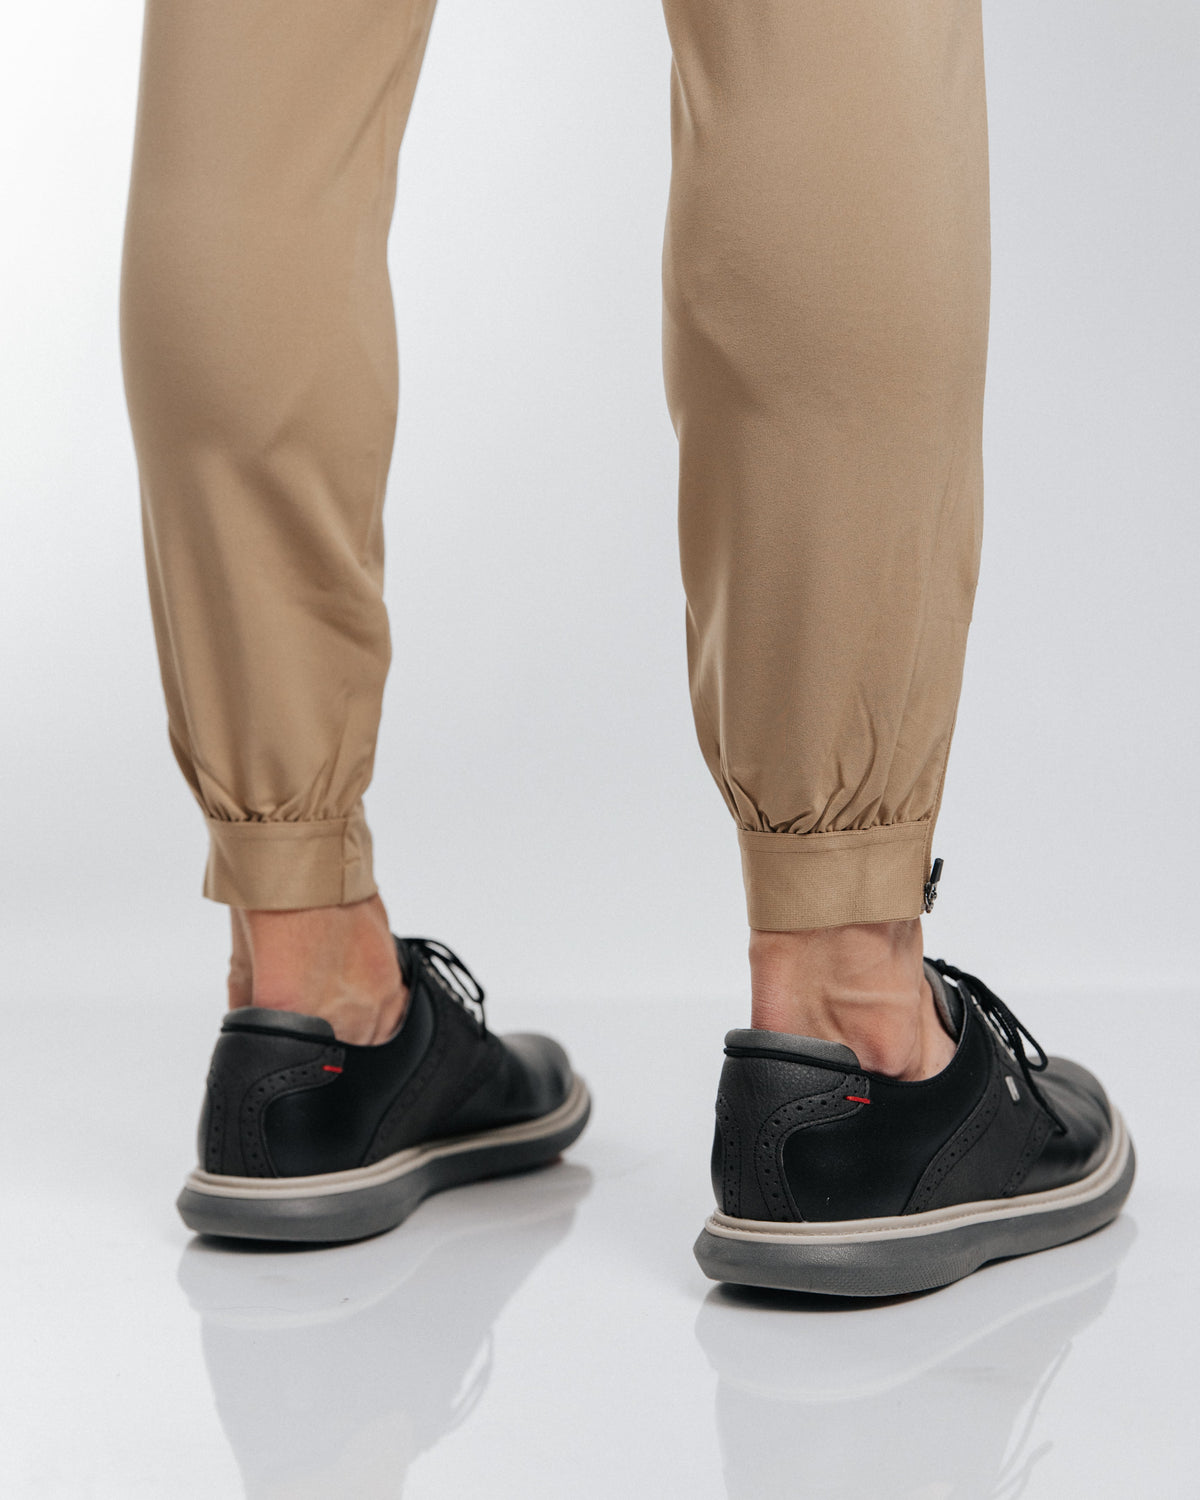 Primo Golf makes golf joggers for every height and size